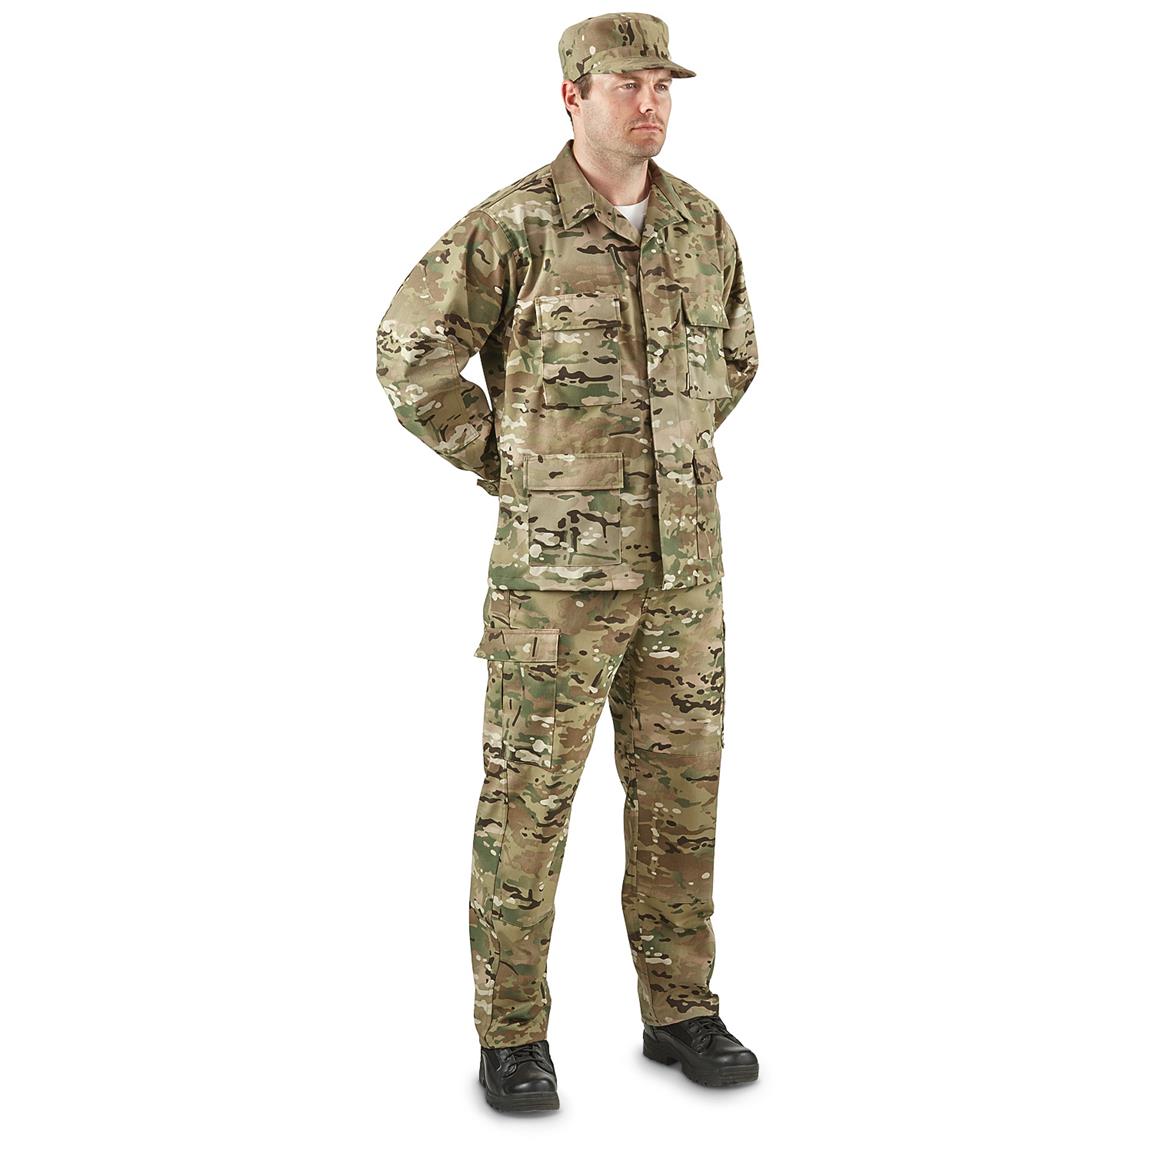 HQ ISSUE Military-style MultiCam BDU Shirt - 641405, Tactical Clothing ...